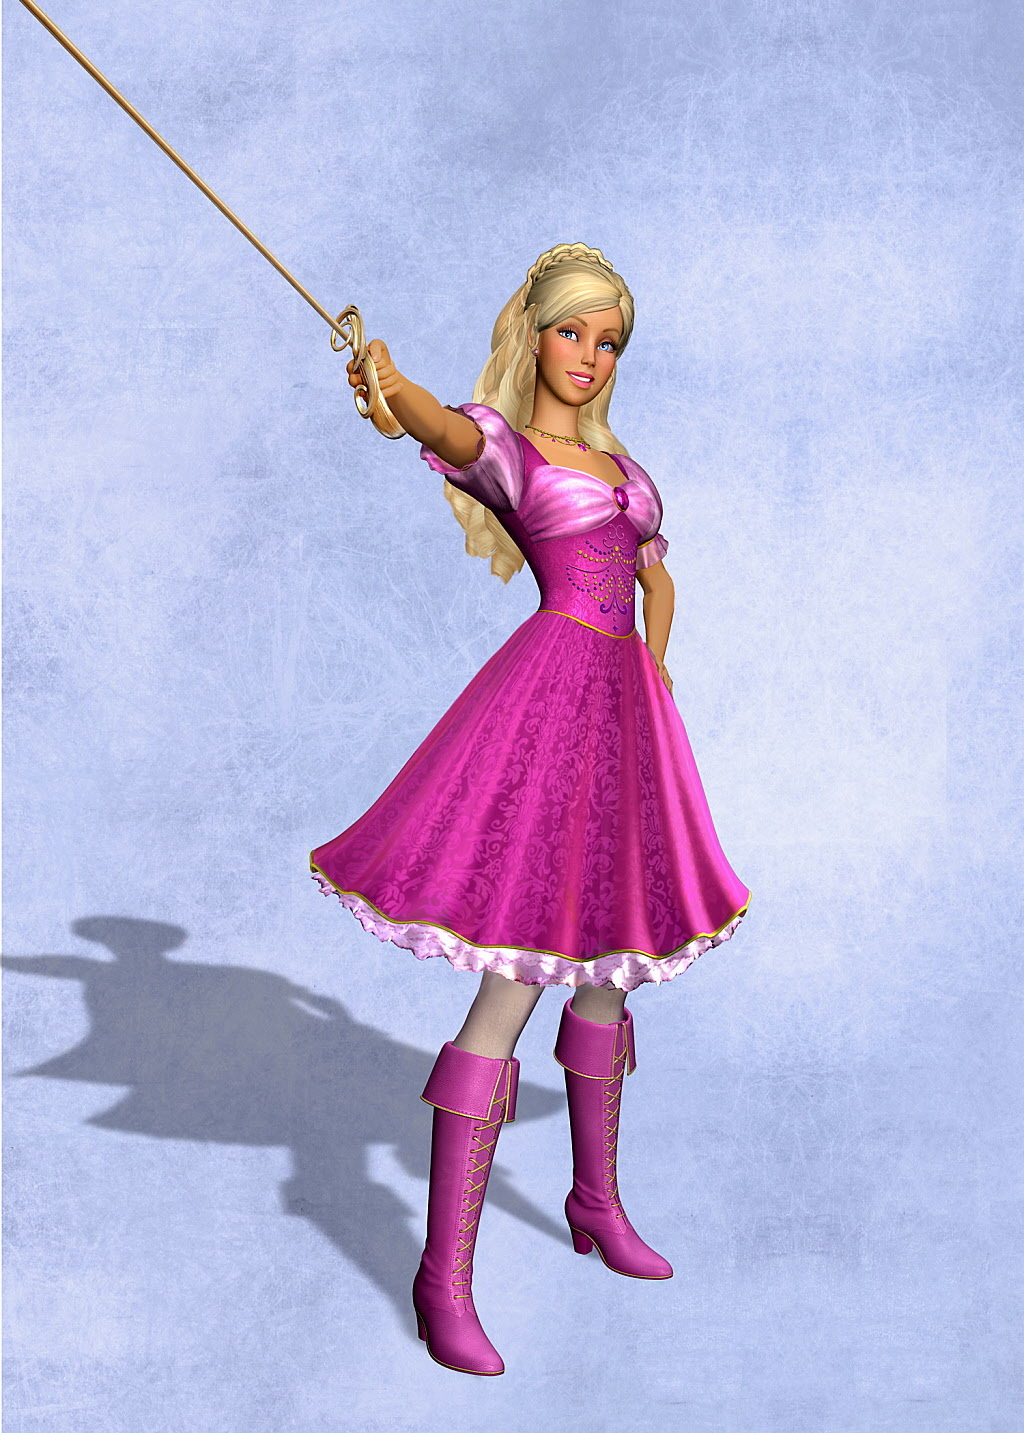 Barbie and the 3 Musketeers ~♥ - Barbie Movies Photo (33146957) - Fanpop